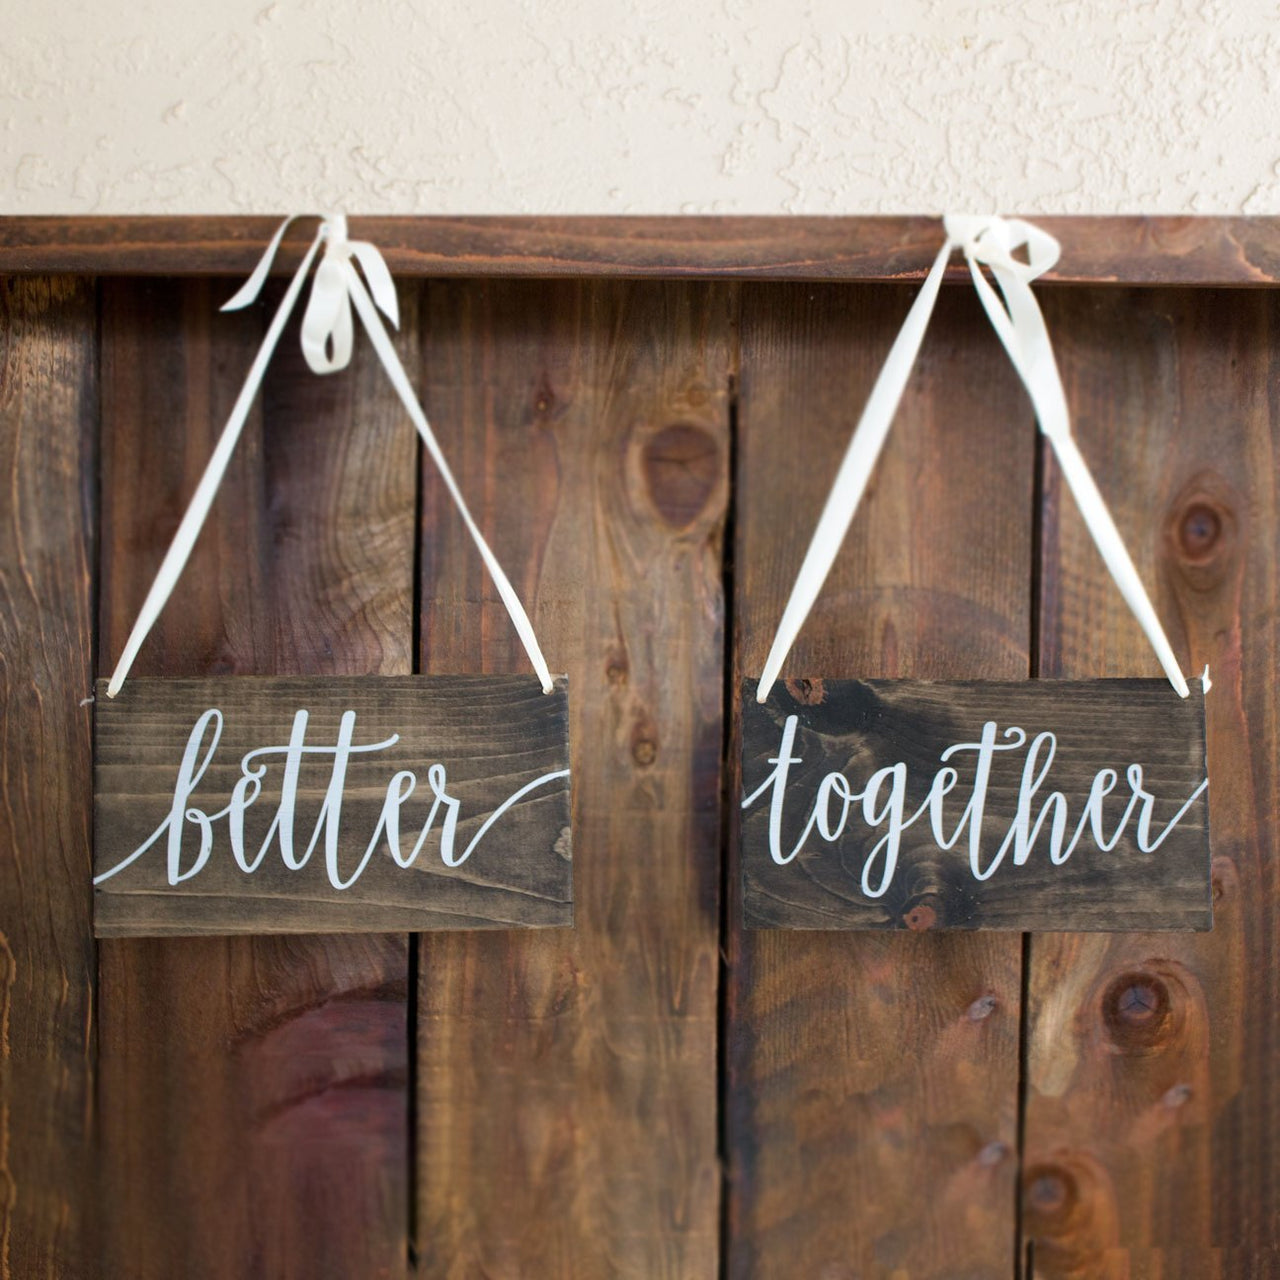 Better Together Calligraphy Hanging Wooden Wedding Chair Signs - Rich Design Co